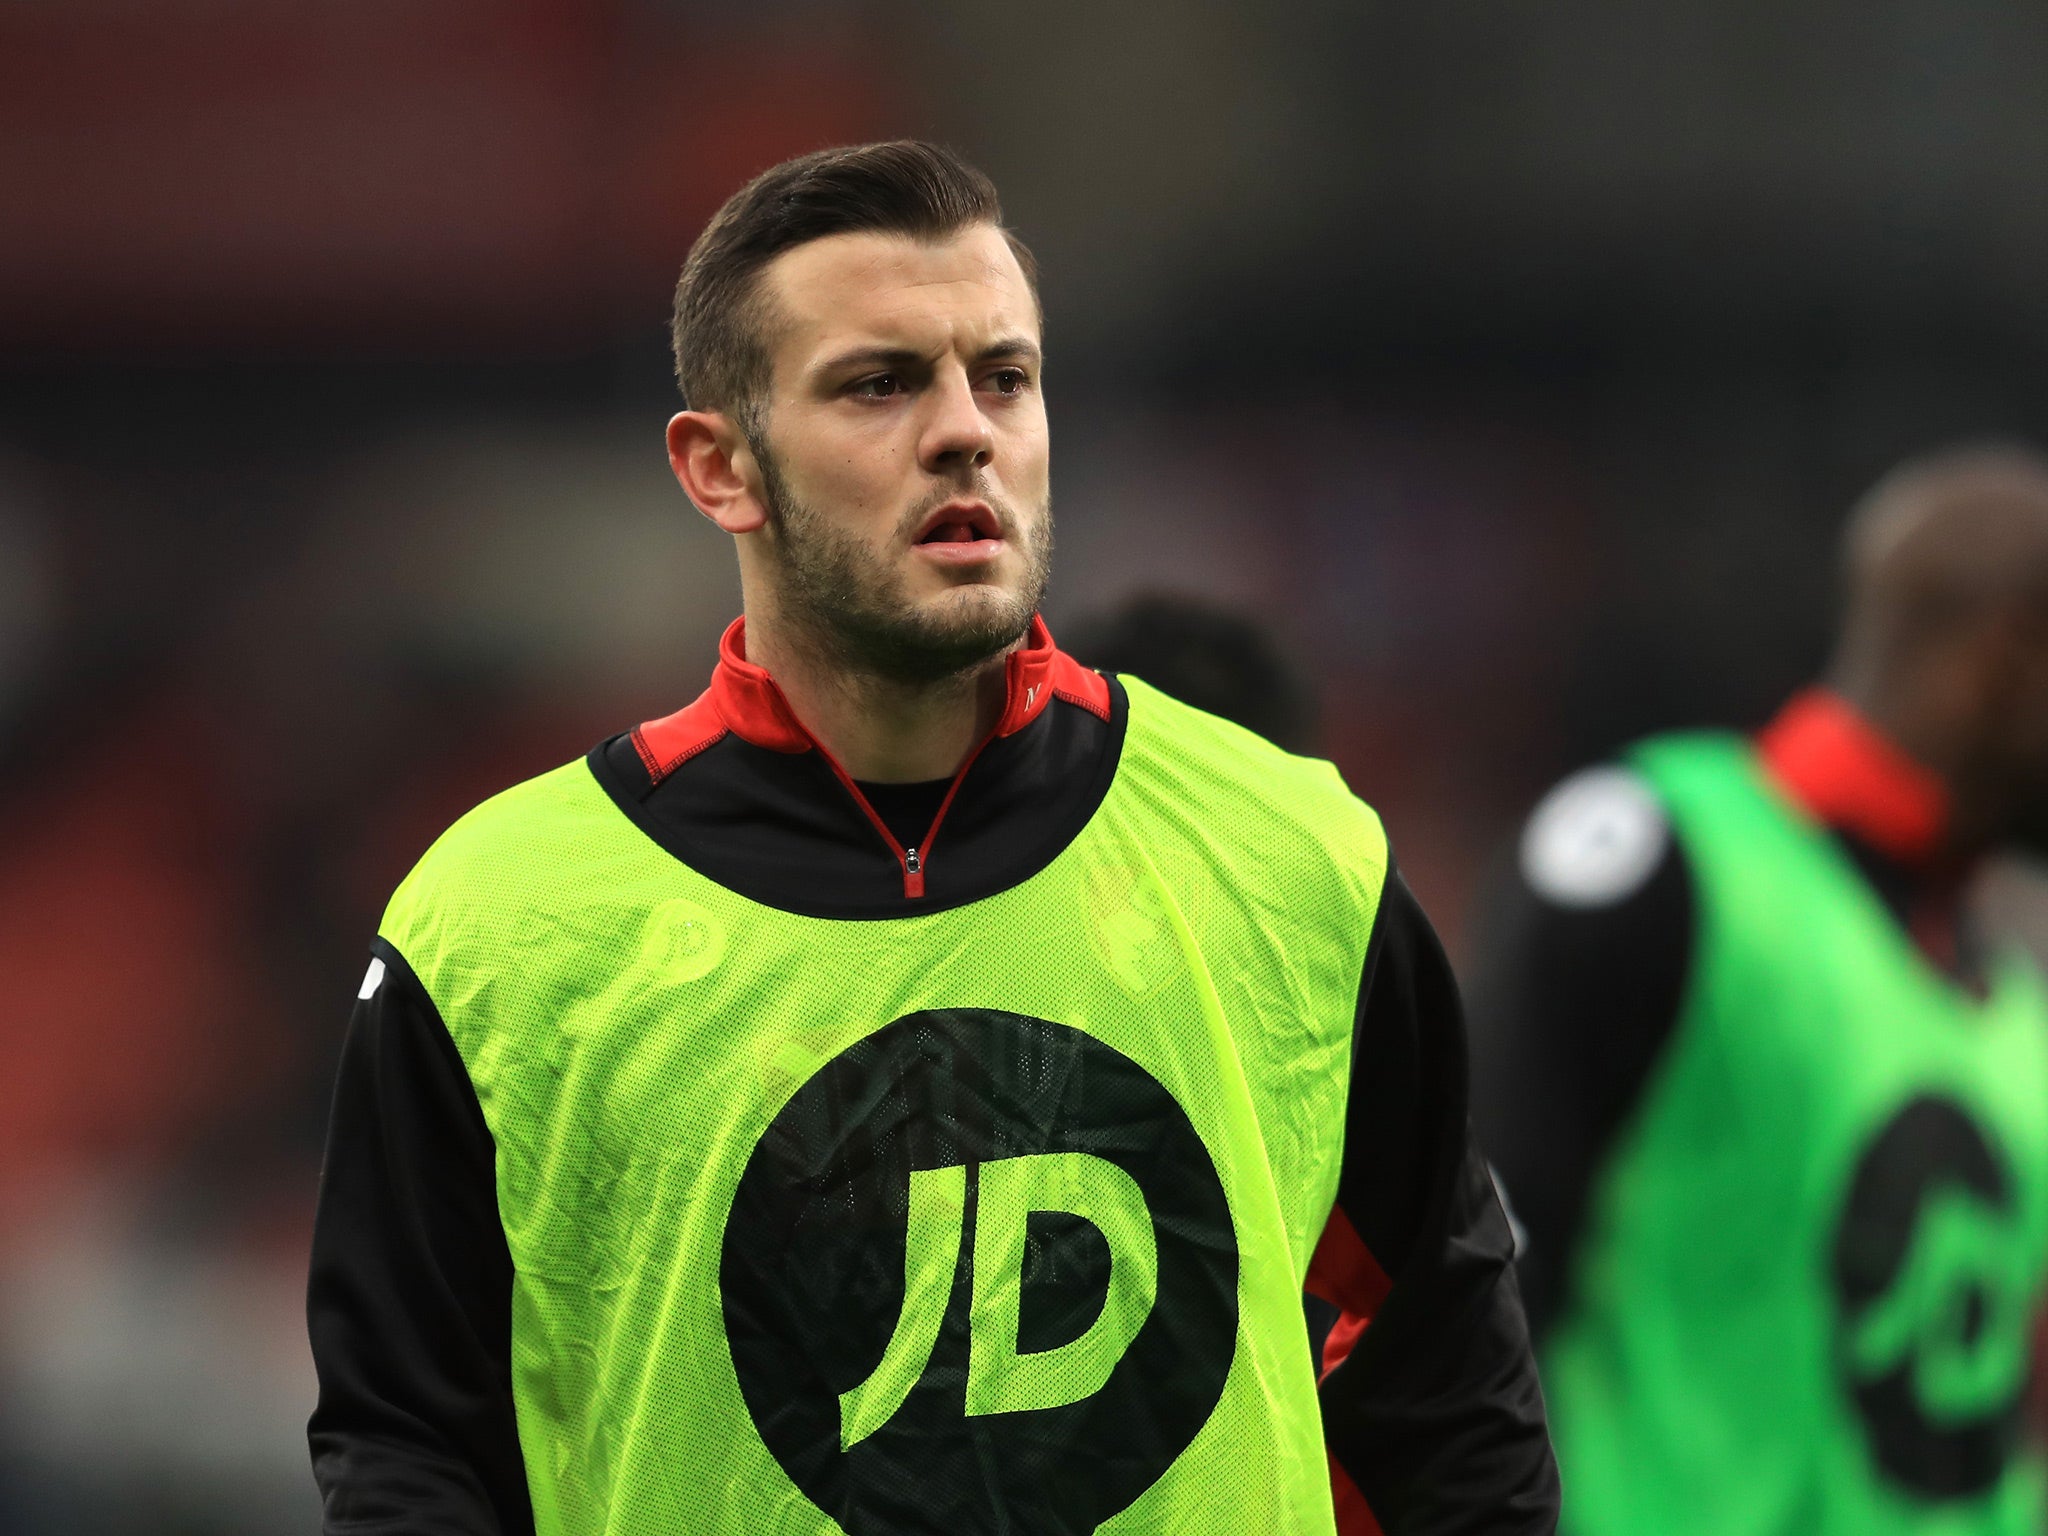 Wilshere is currently out on loan at Bournemouth